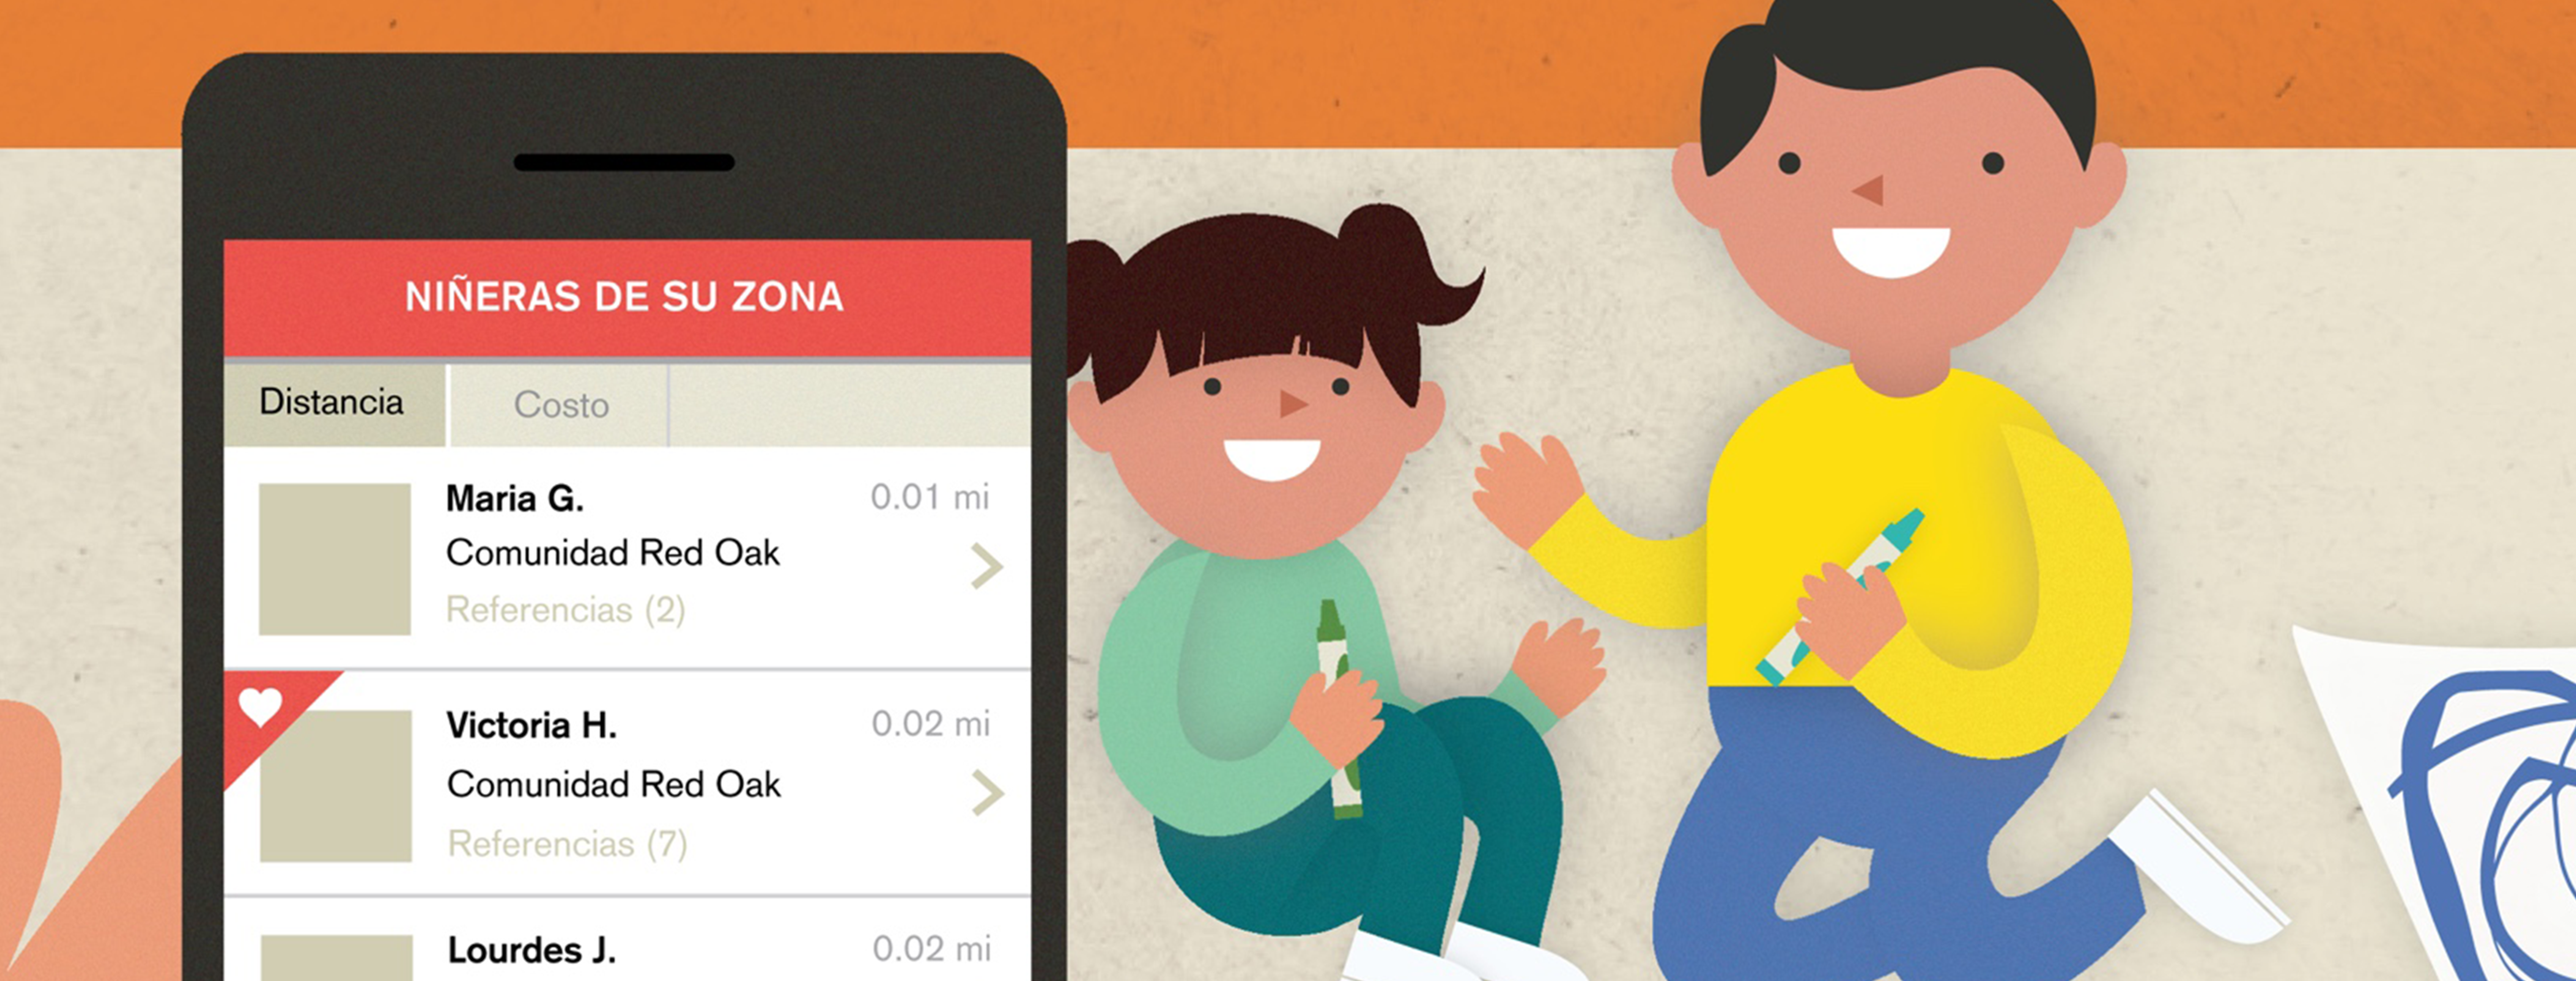 a cartoon-style illustration of two children, a boy and a girl, medium-skinned, sitting on the floor and smiling. they both hold markers. in the foreground, a hand holds a phone and the screen shows "Nineras de su zona" then lists the names of 3 possible caregivers nearby.